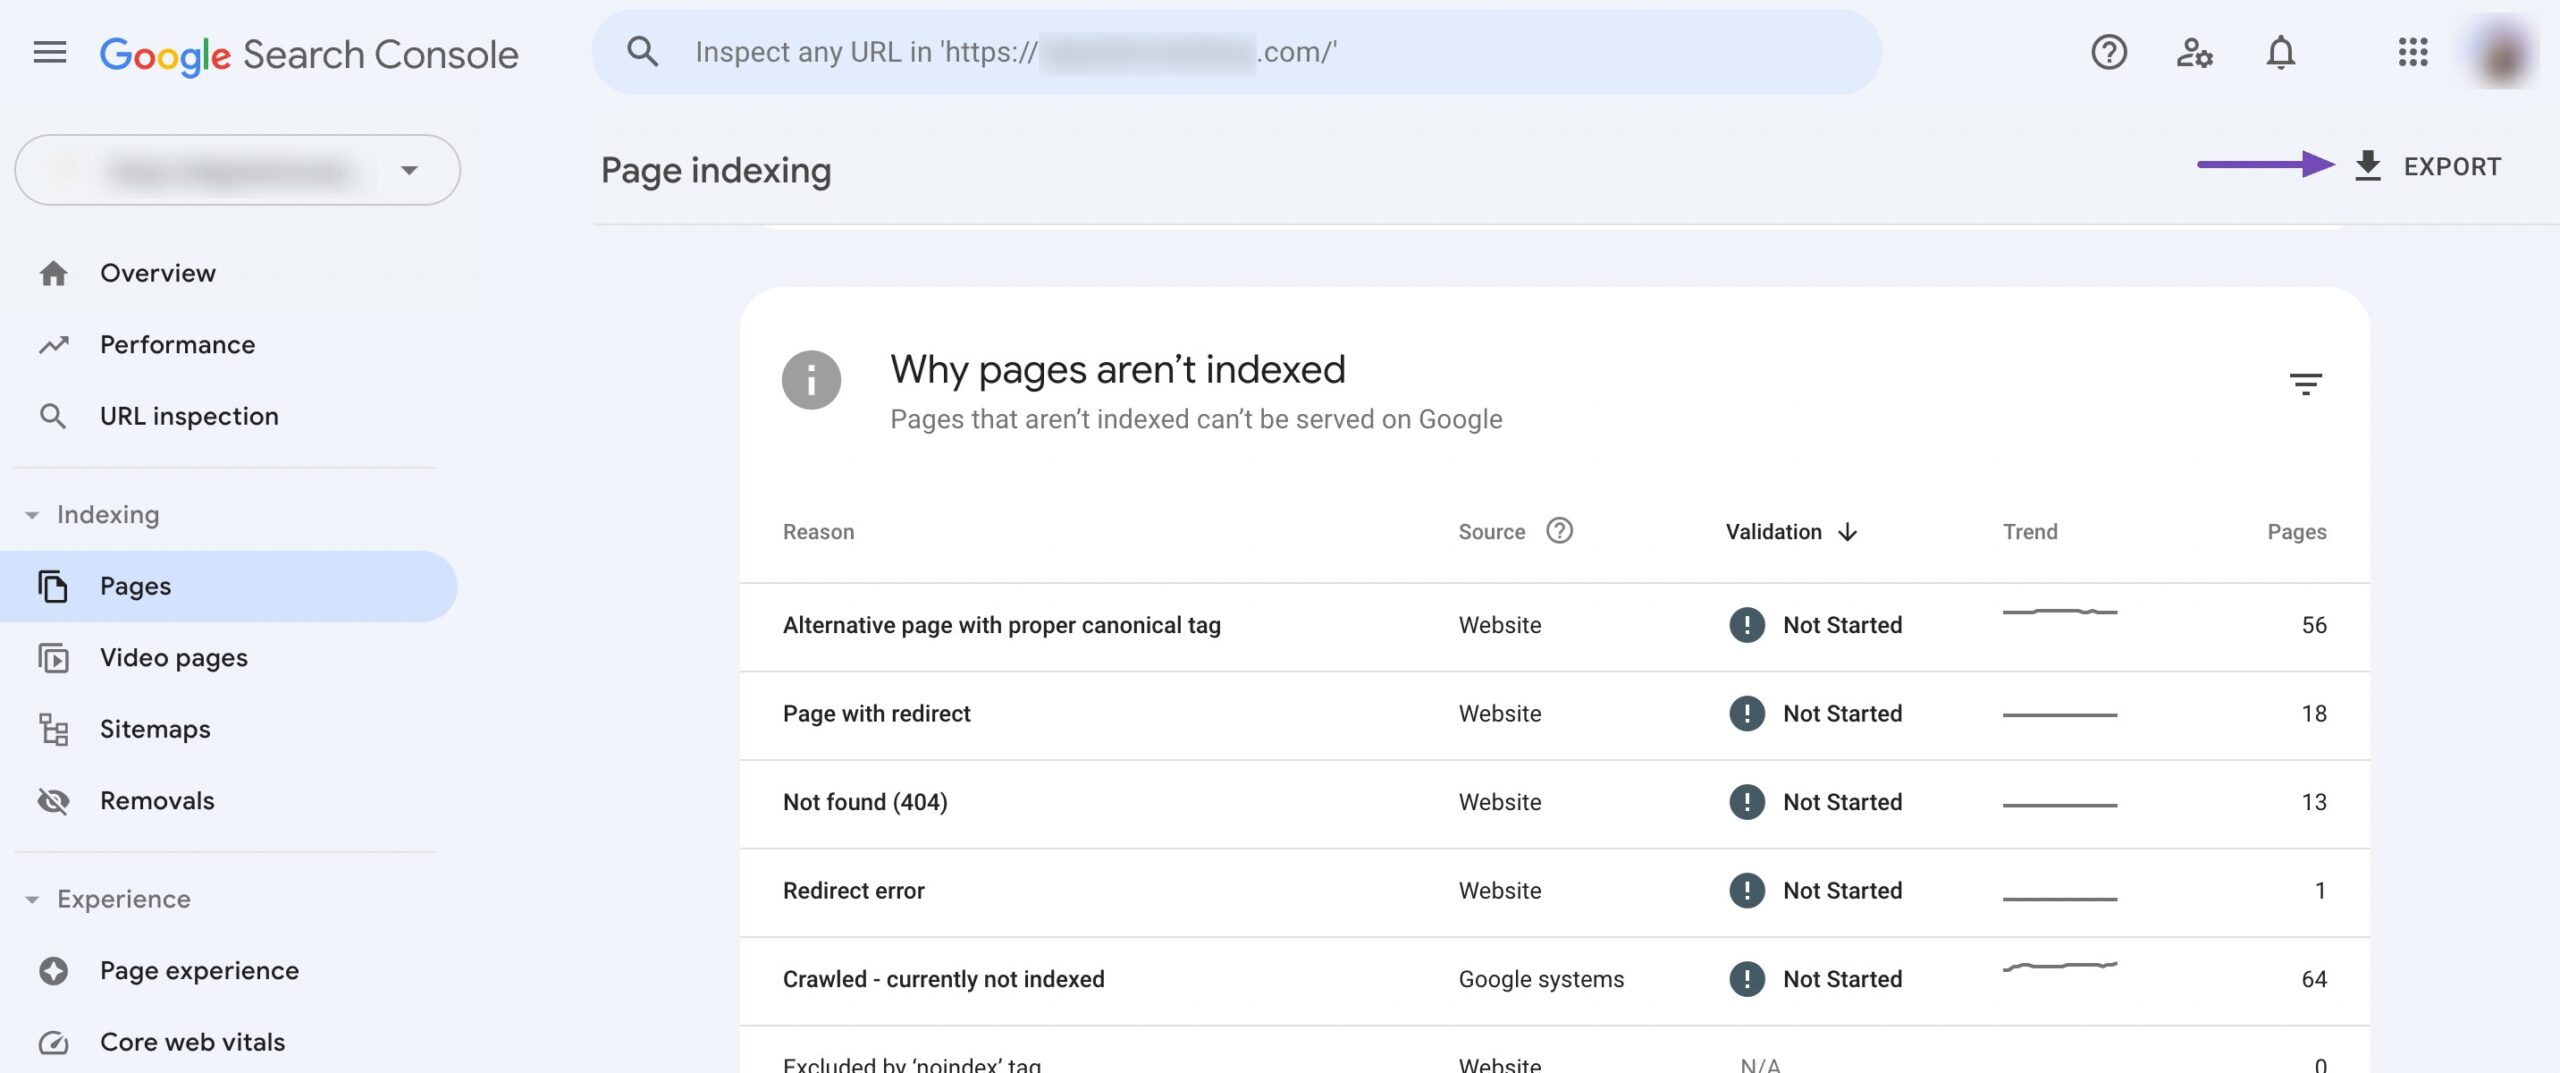 Export data in Google Search Console